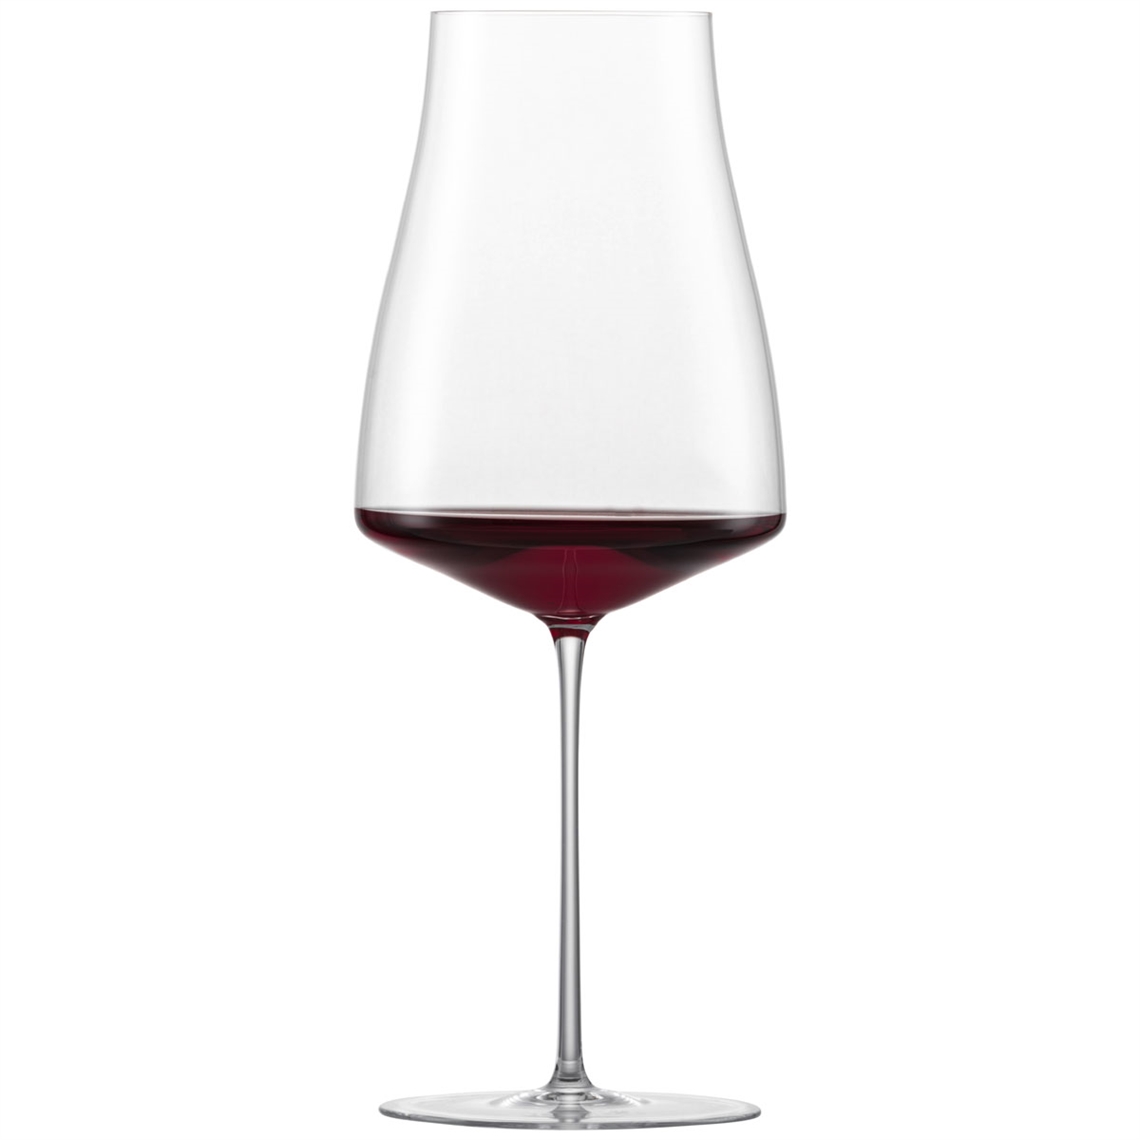 Zwiesel 1872 The Moment Bordeaux Glass - Set of 2